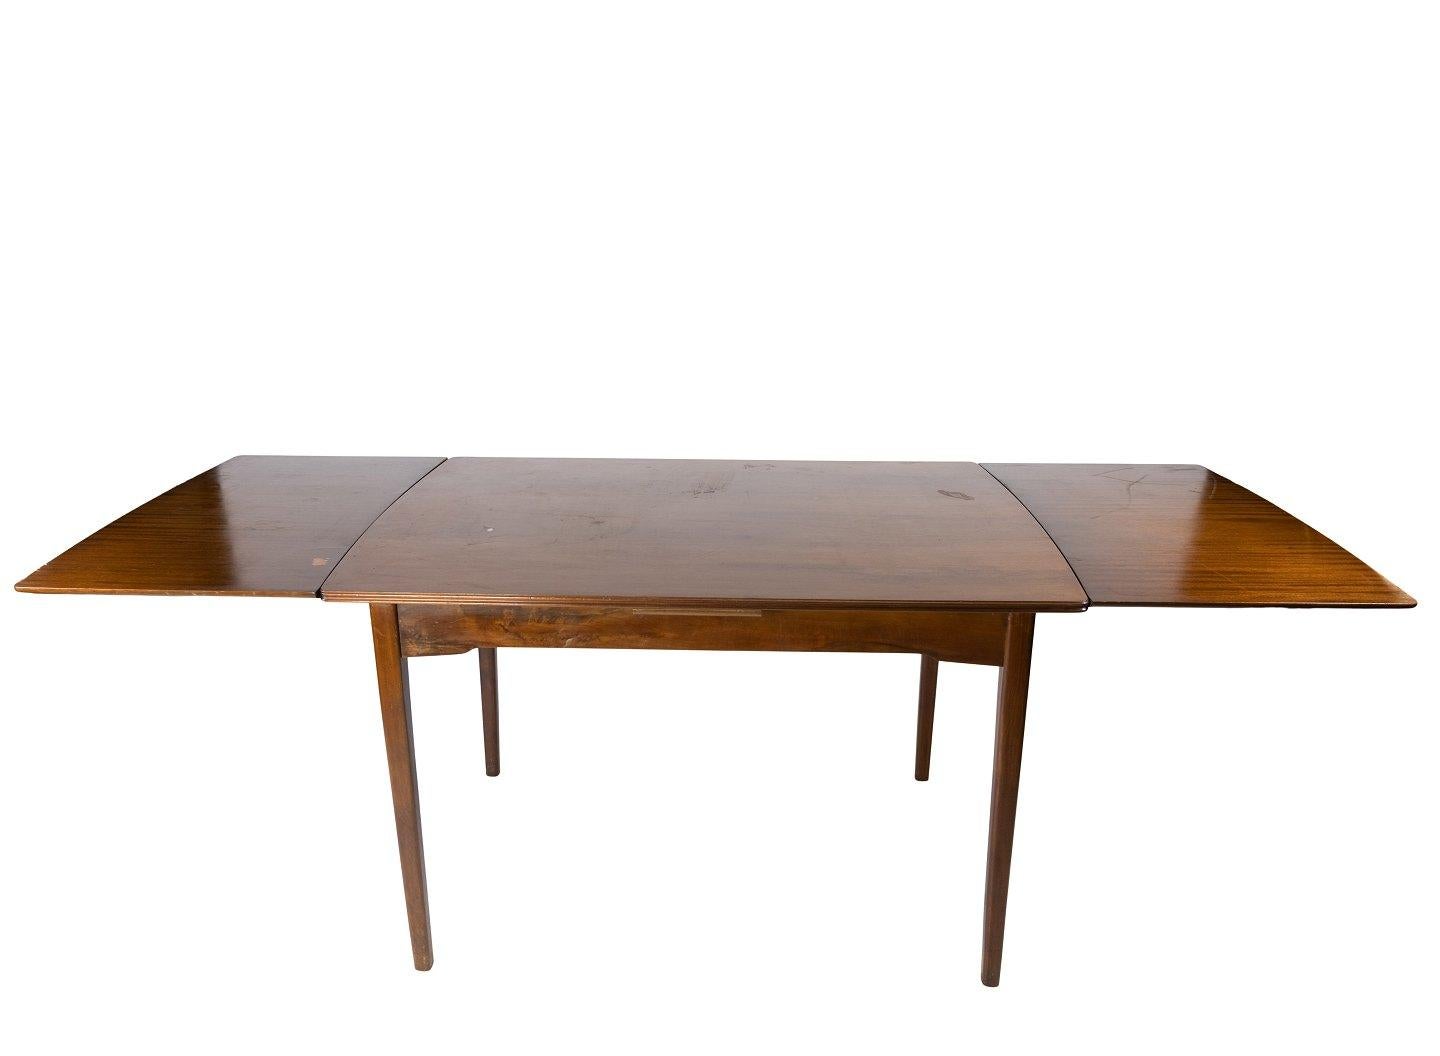 Dining table in walnut with extension of Danish design from the 1960s.